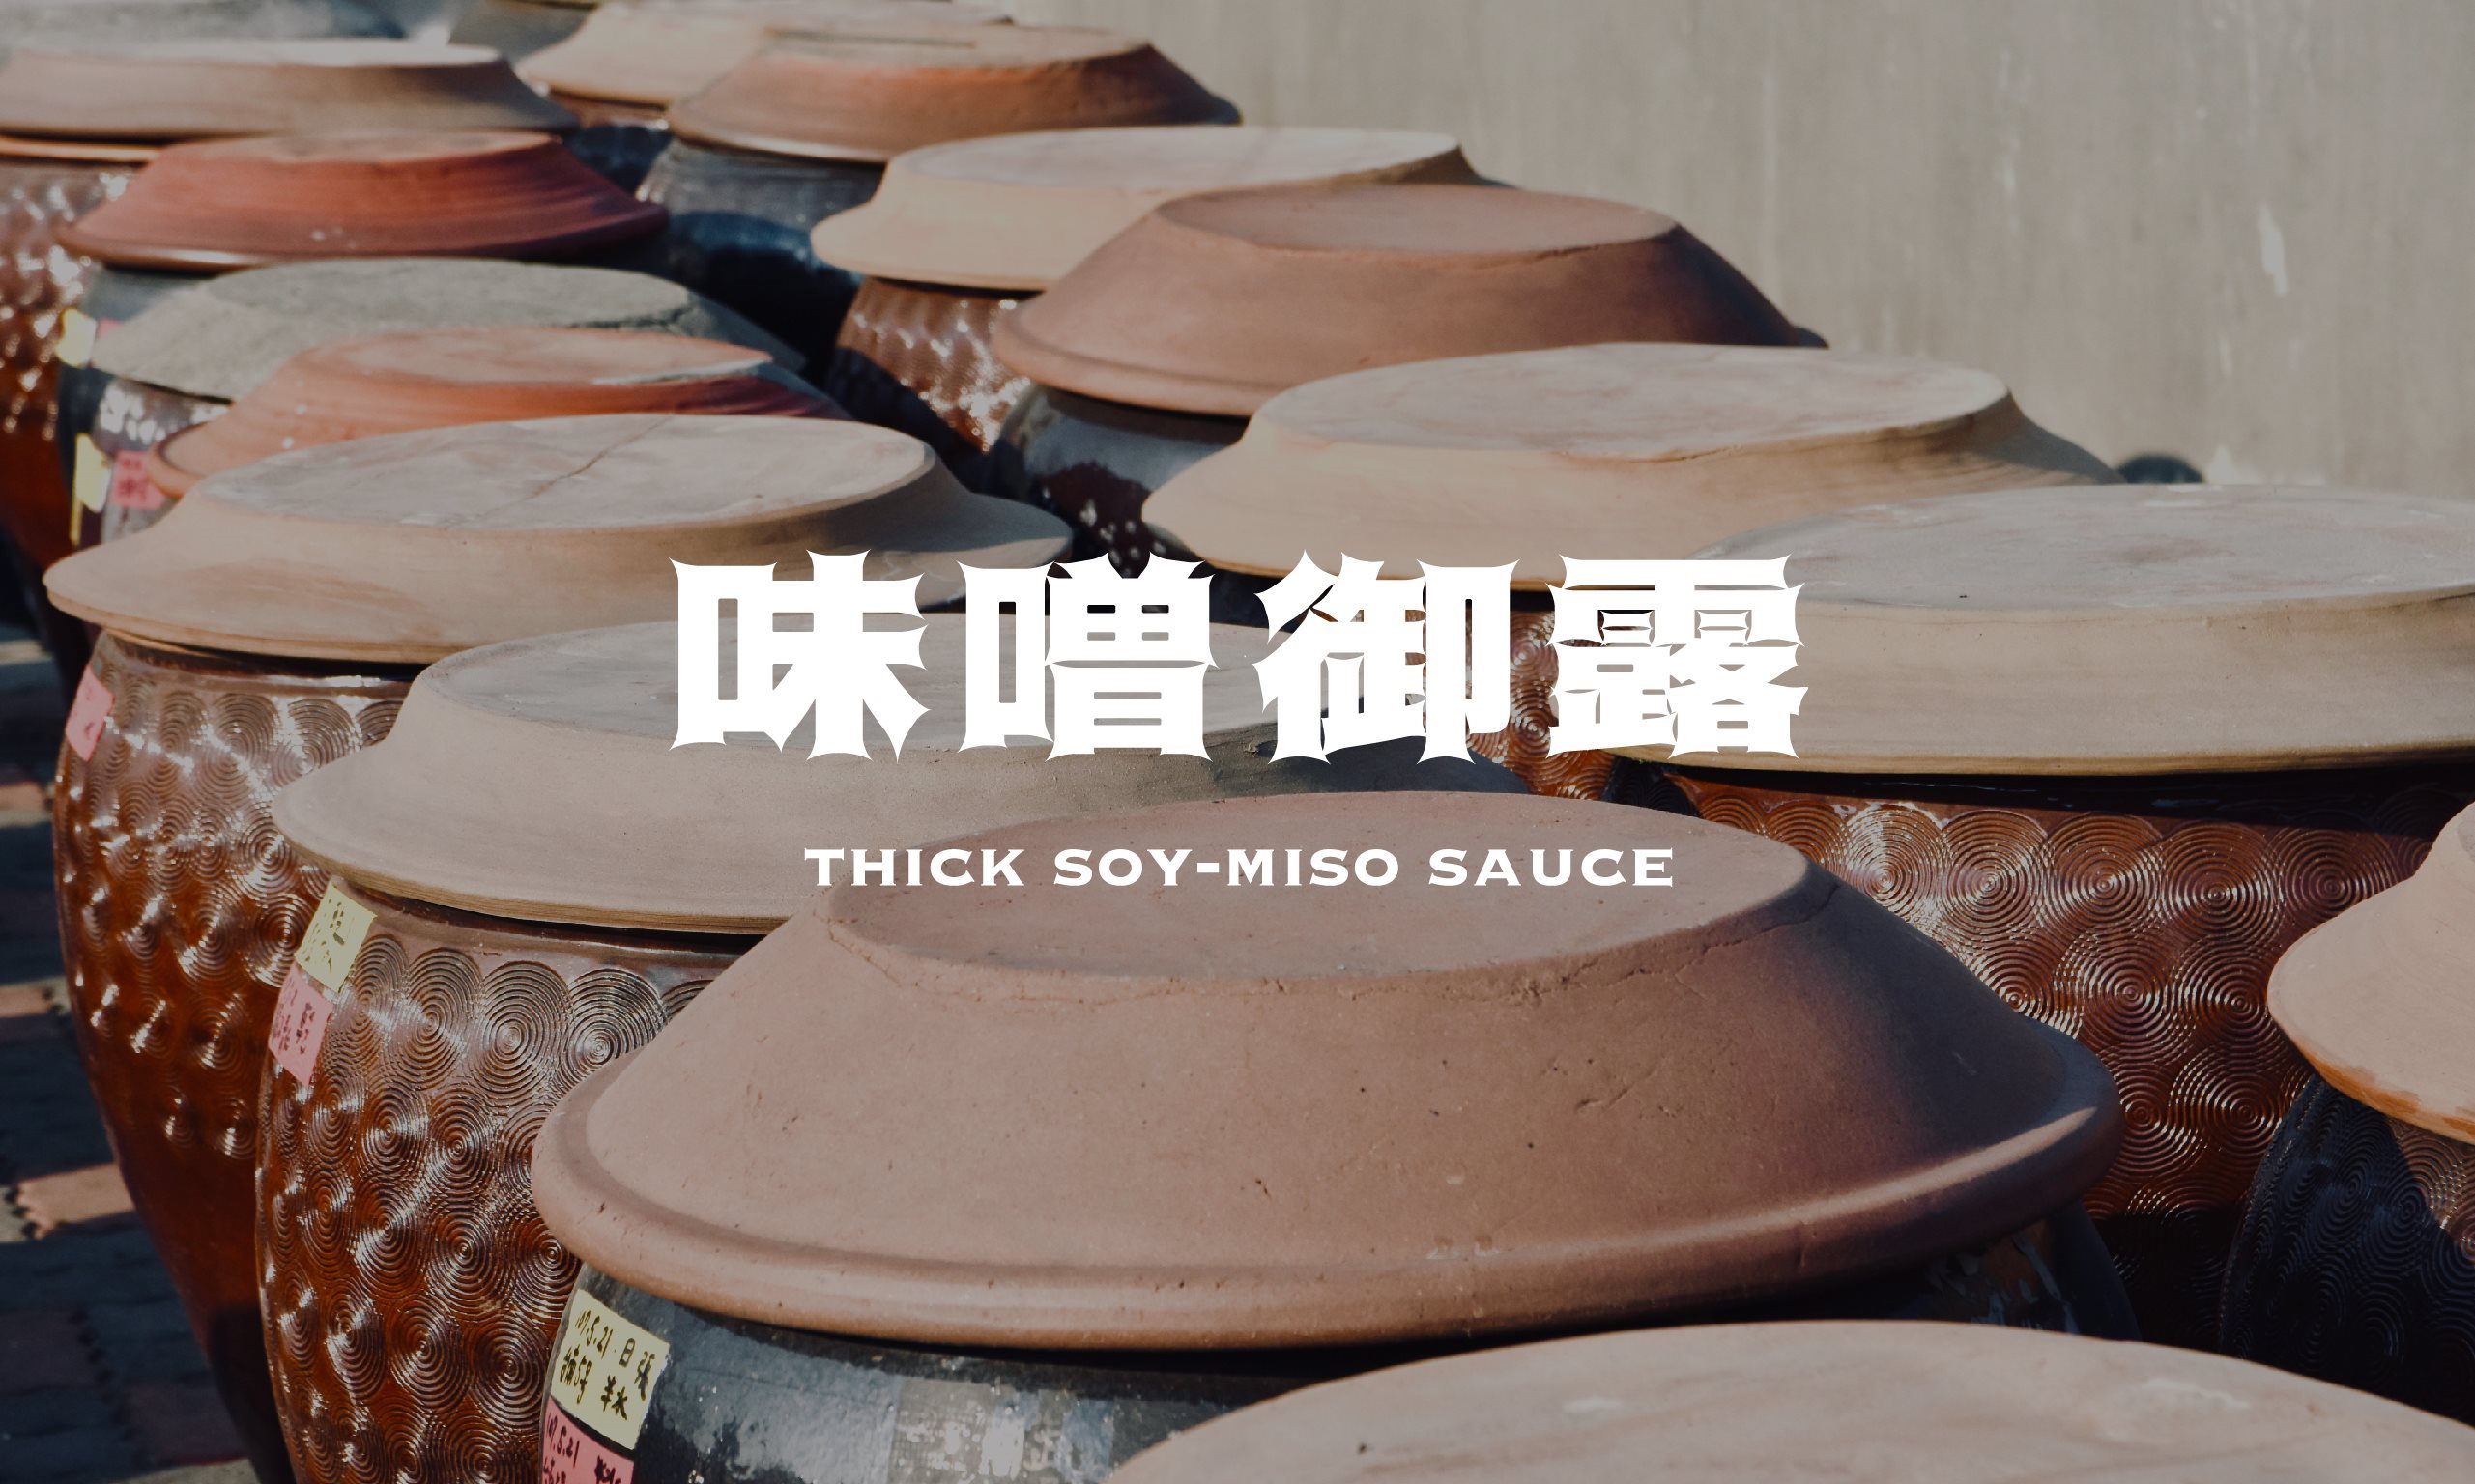 Thick Soy-Miso Sauce - Taiwan handmade soy sauce by finest soybeans and black beans